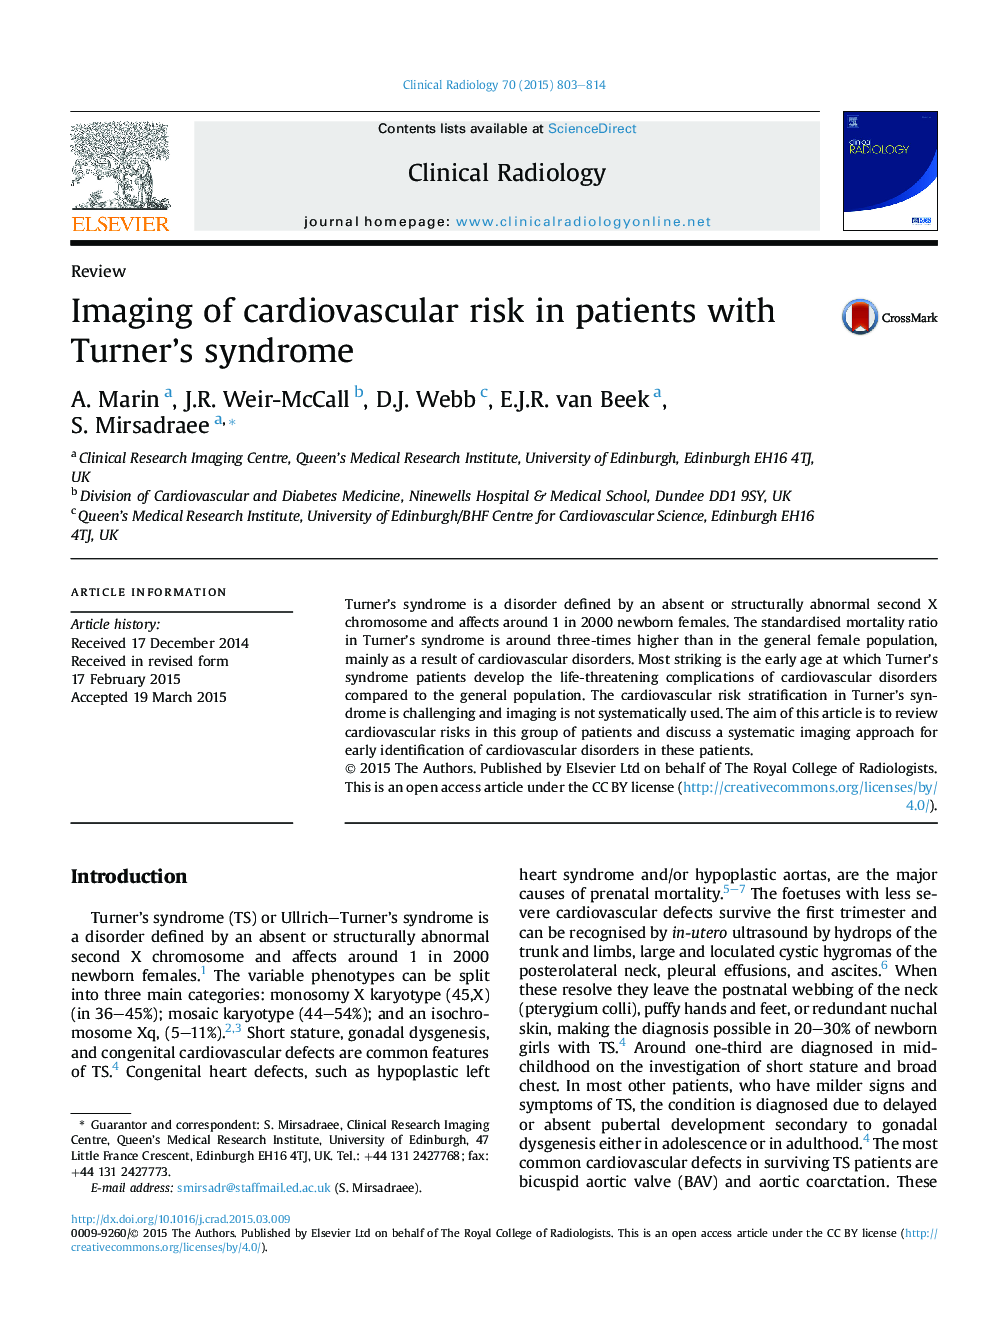 Imaging of cardiovascular risk in patients with Turner's syndrome